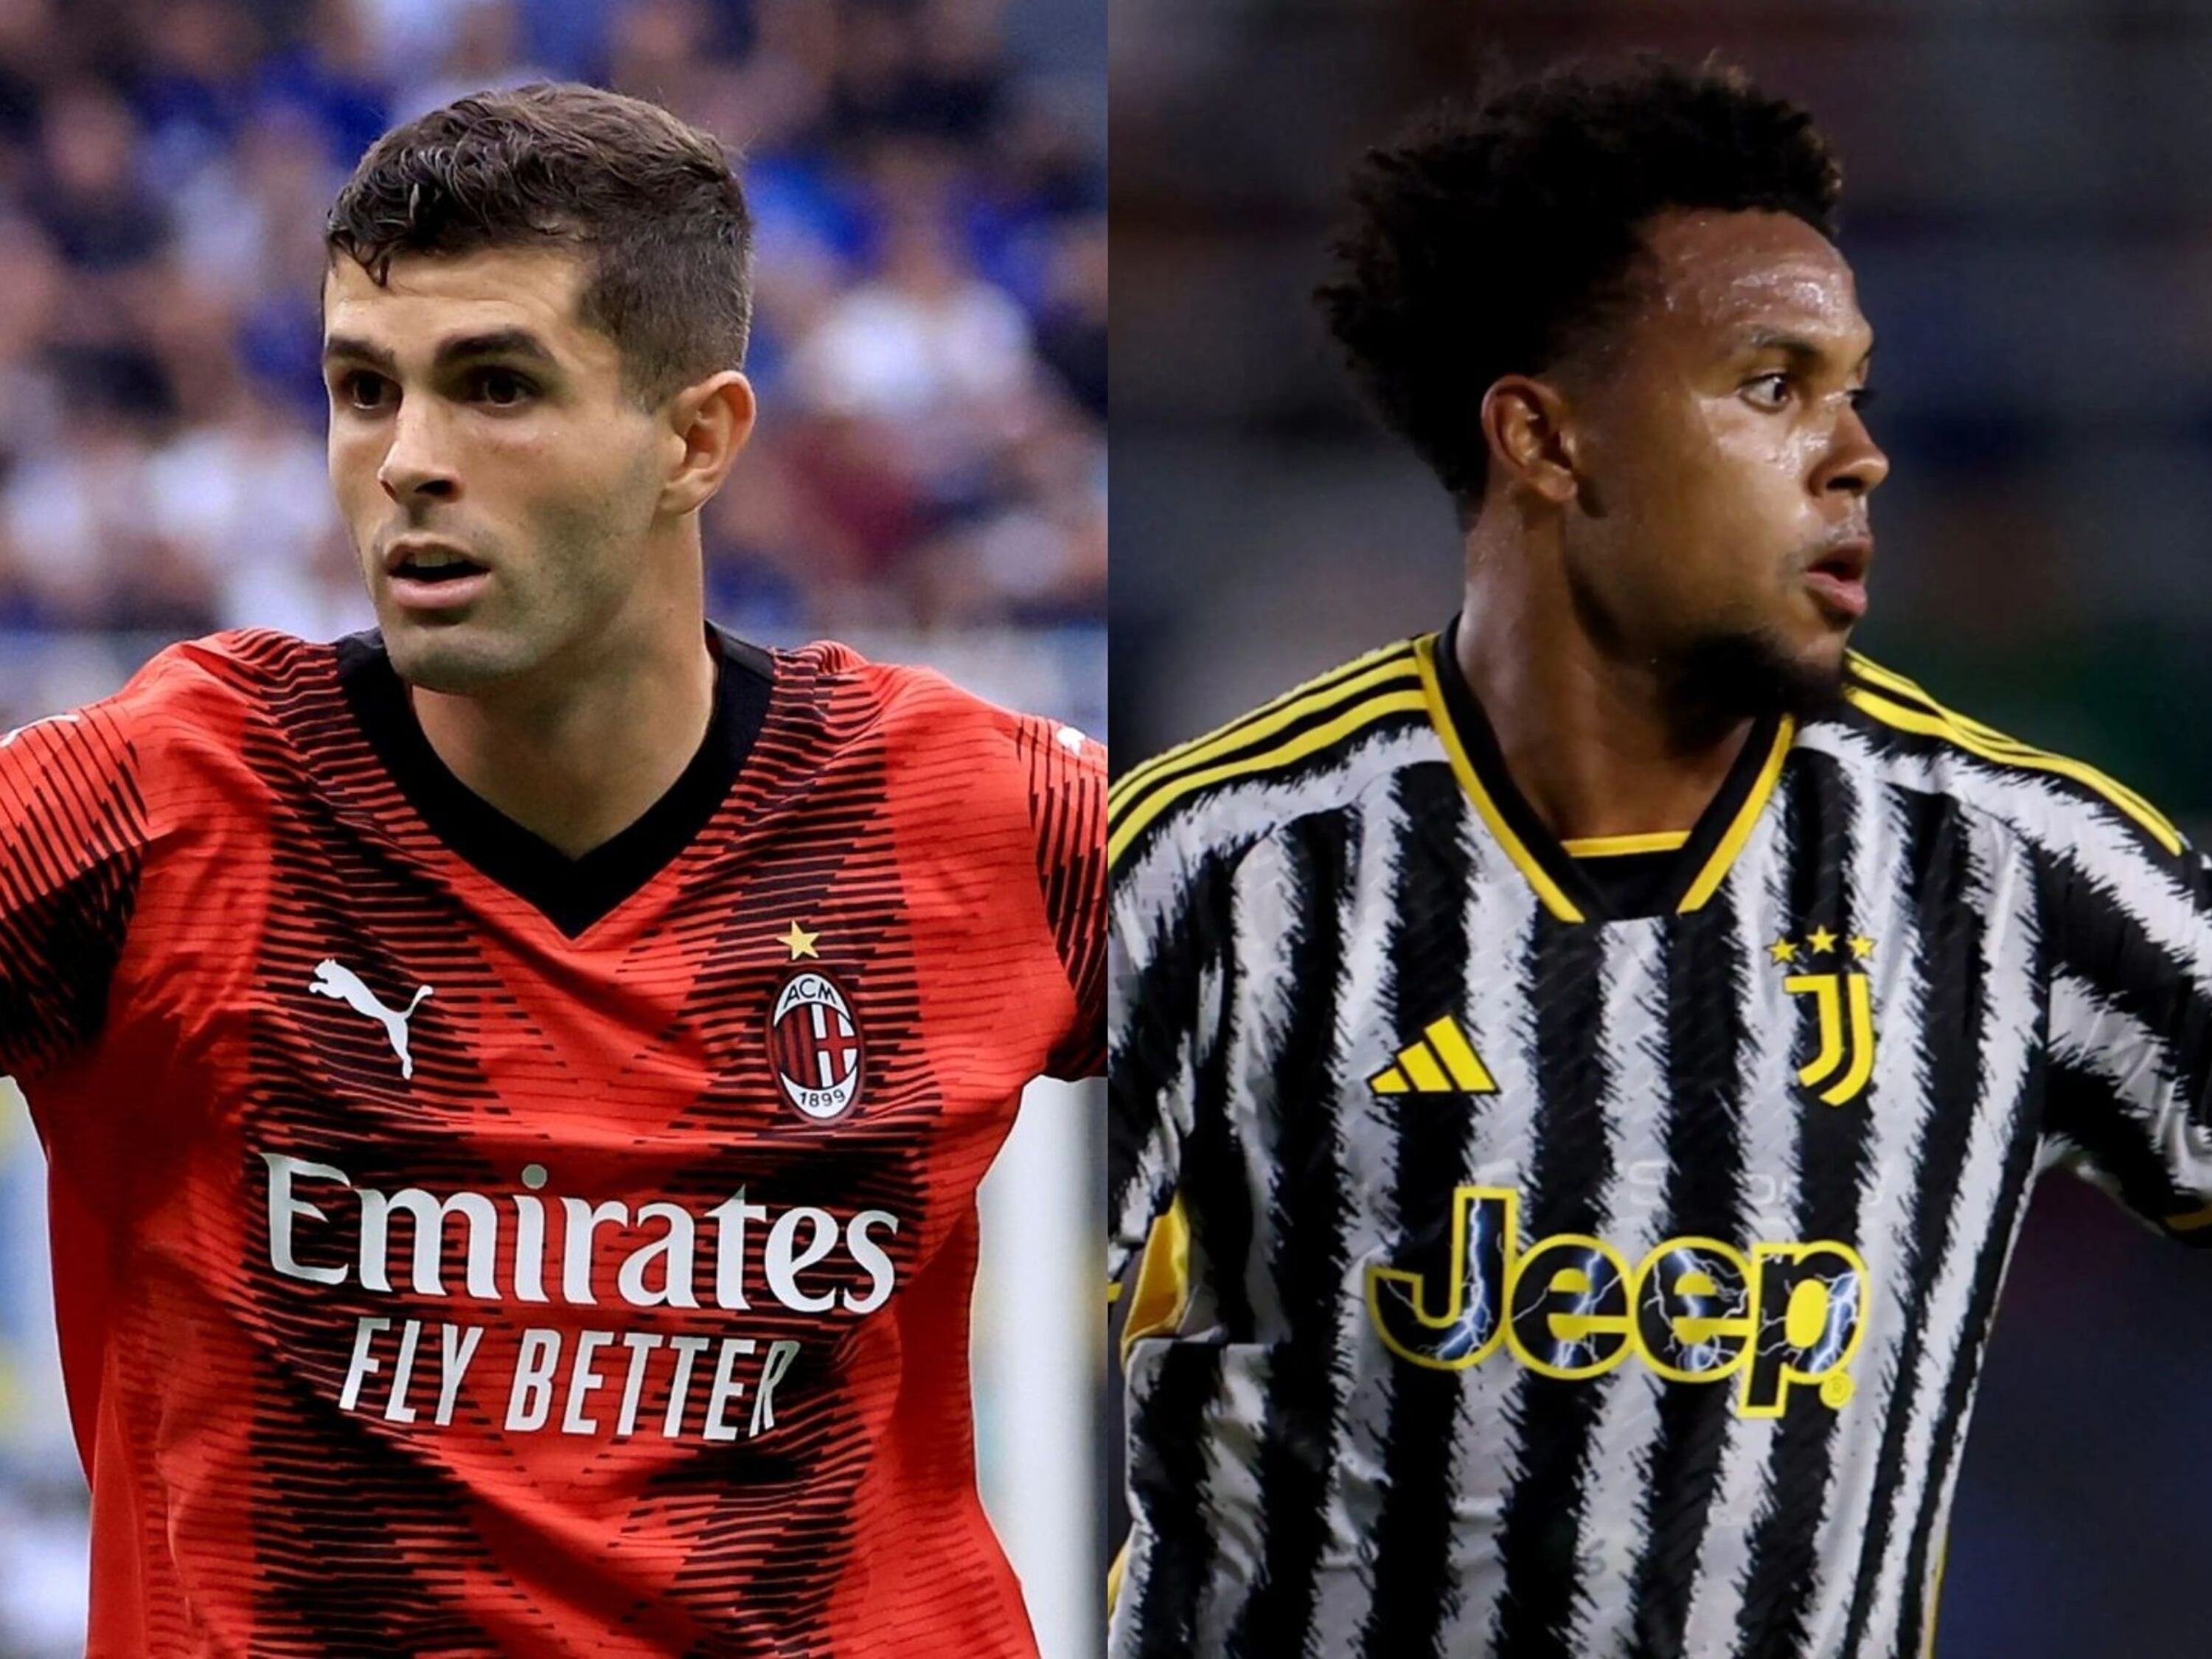 With an own goal, McKennie's Juventus is defeating Christian Pulisic's Milan